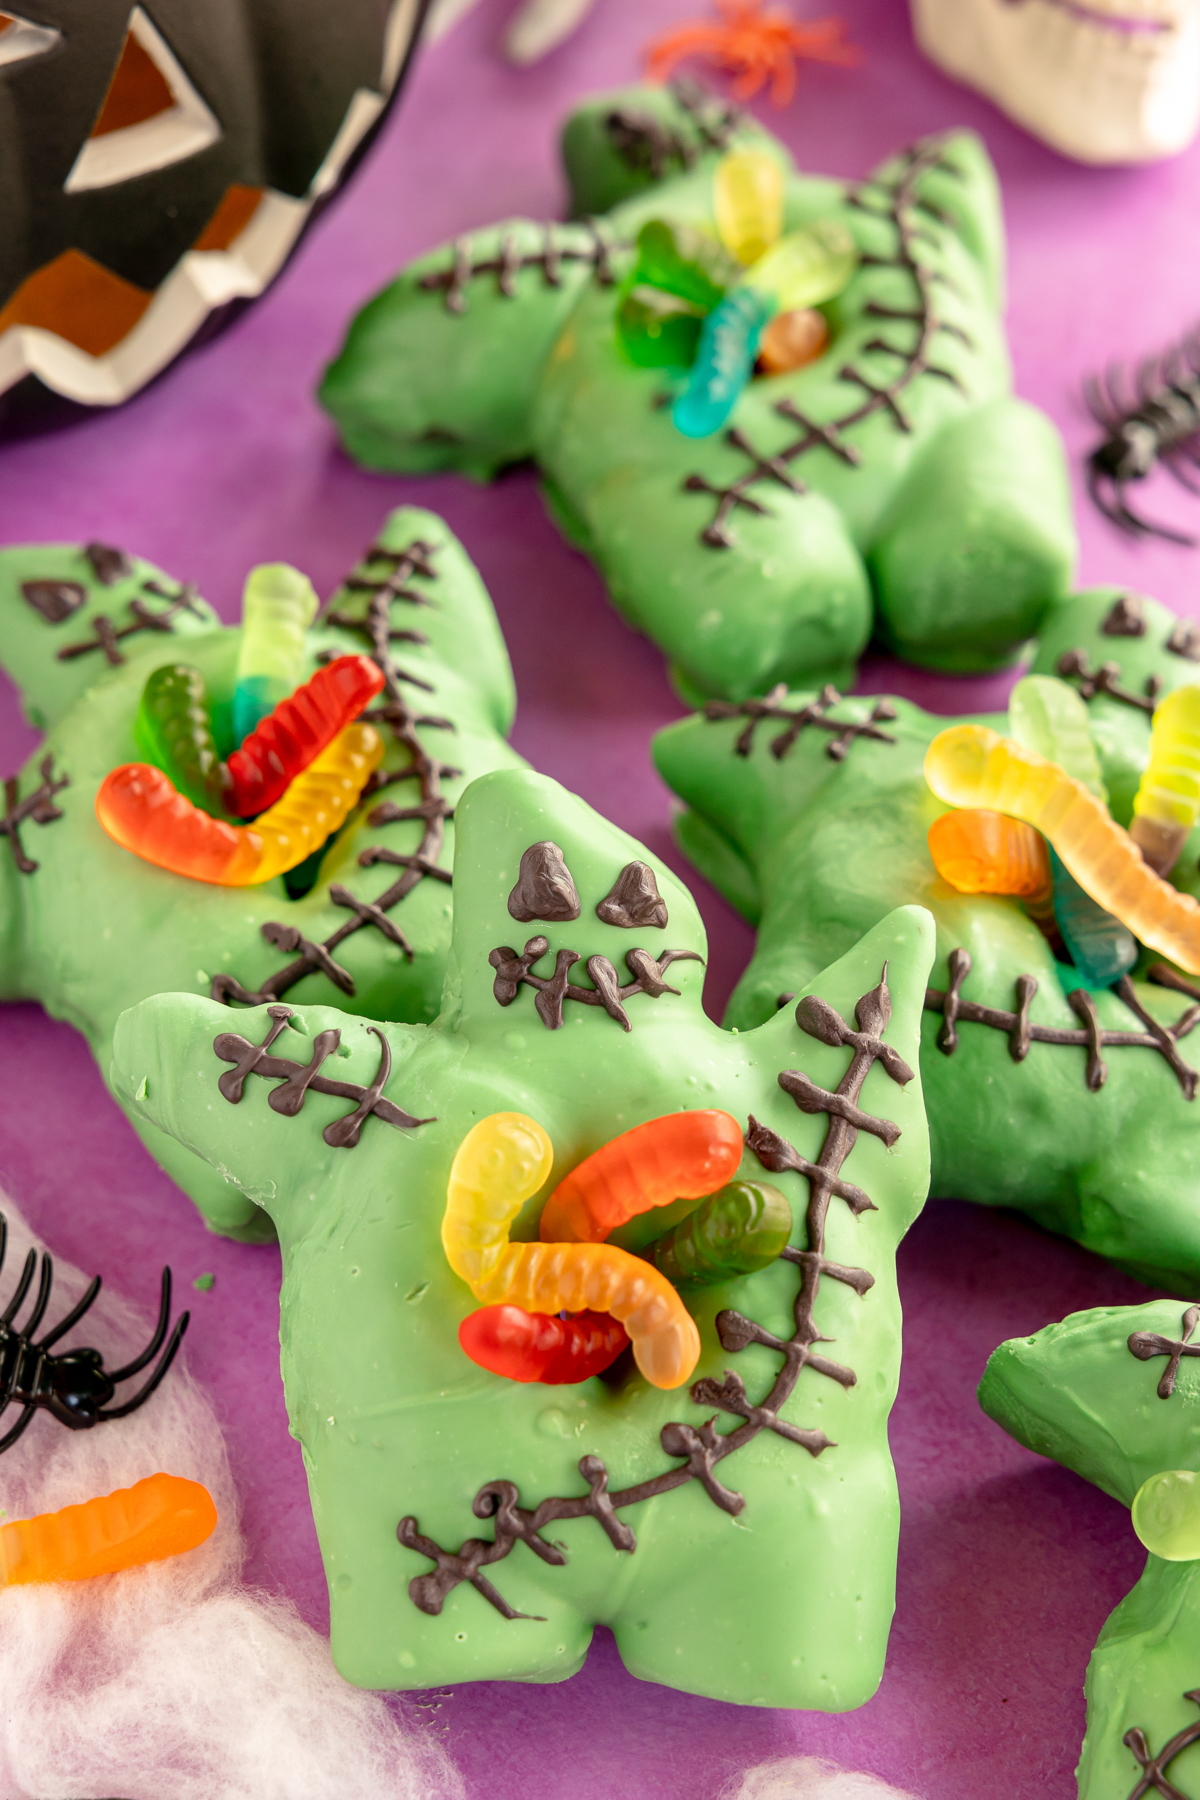 oogie boogie donuts with gummy worms in their bellies